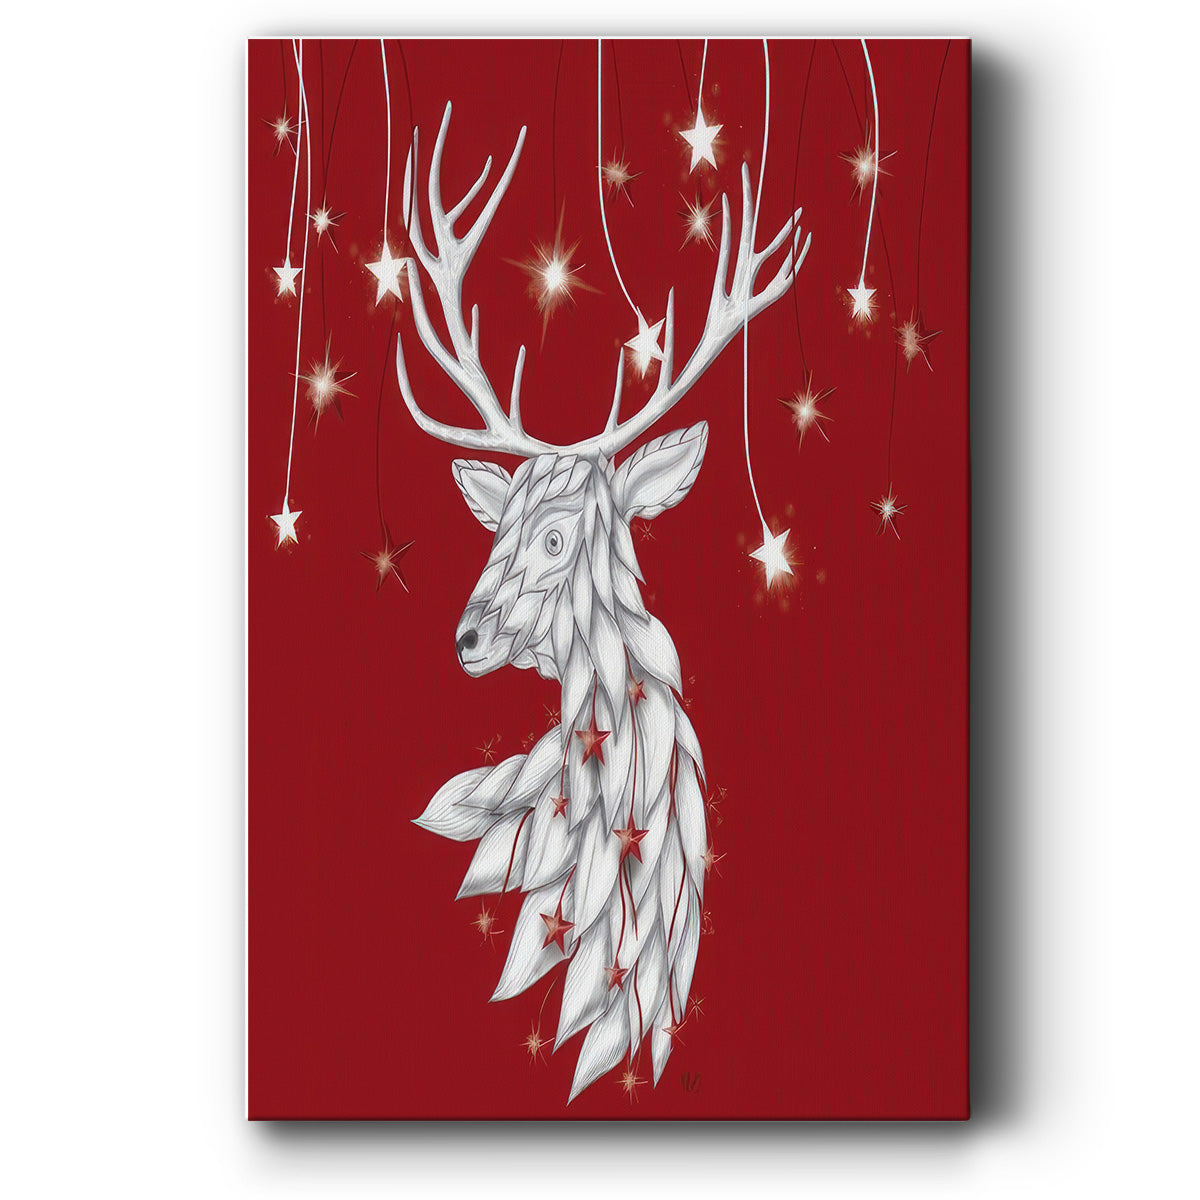 White Deer and Hanging Stars - Gallery Wrapped Canvas